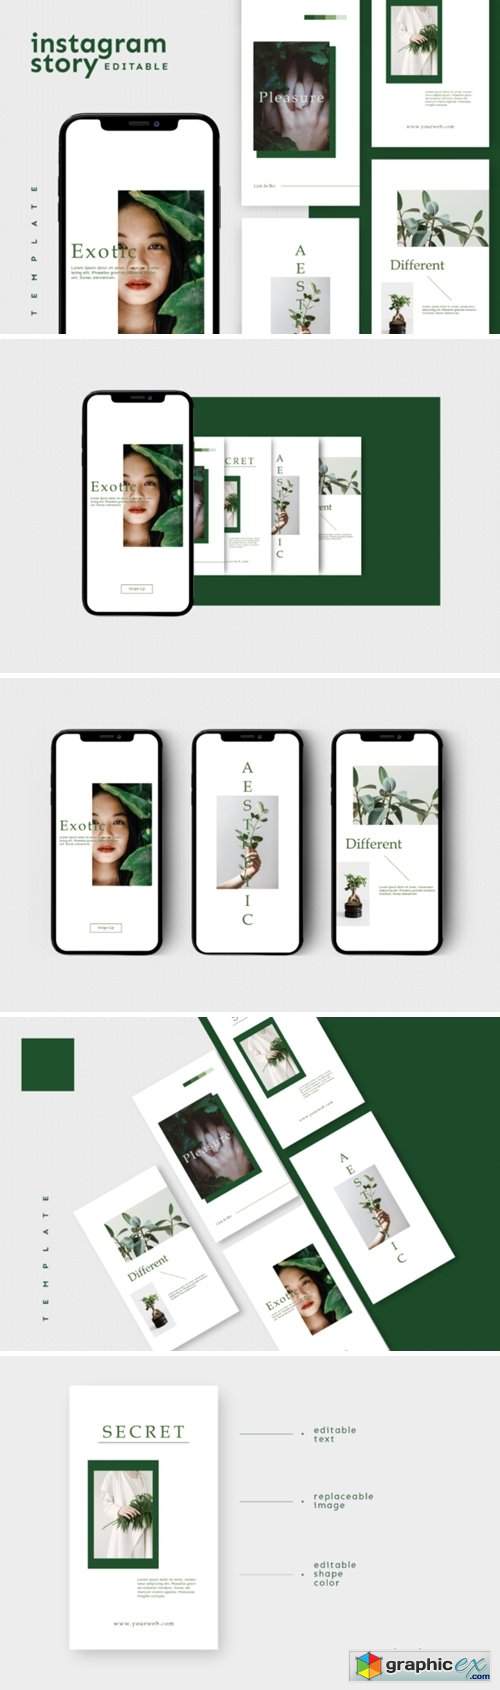  Instagram Story Template 3776056 